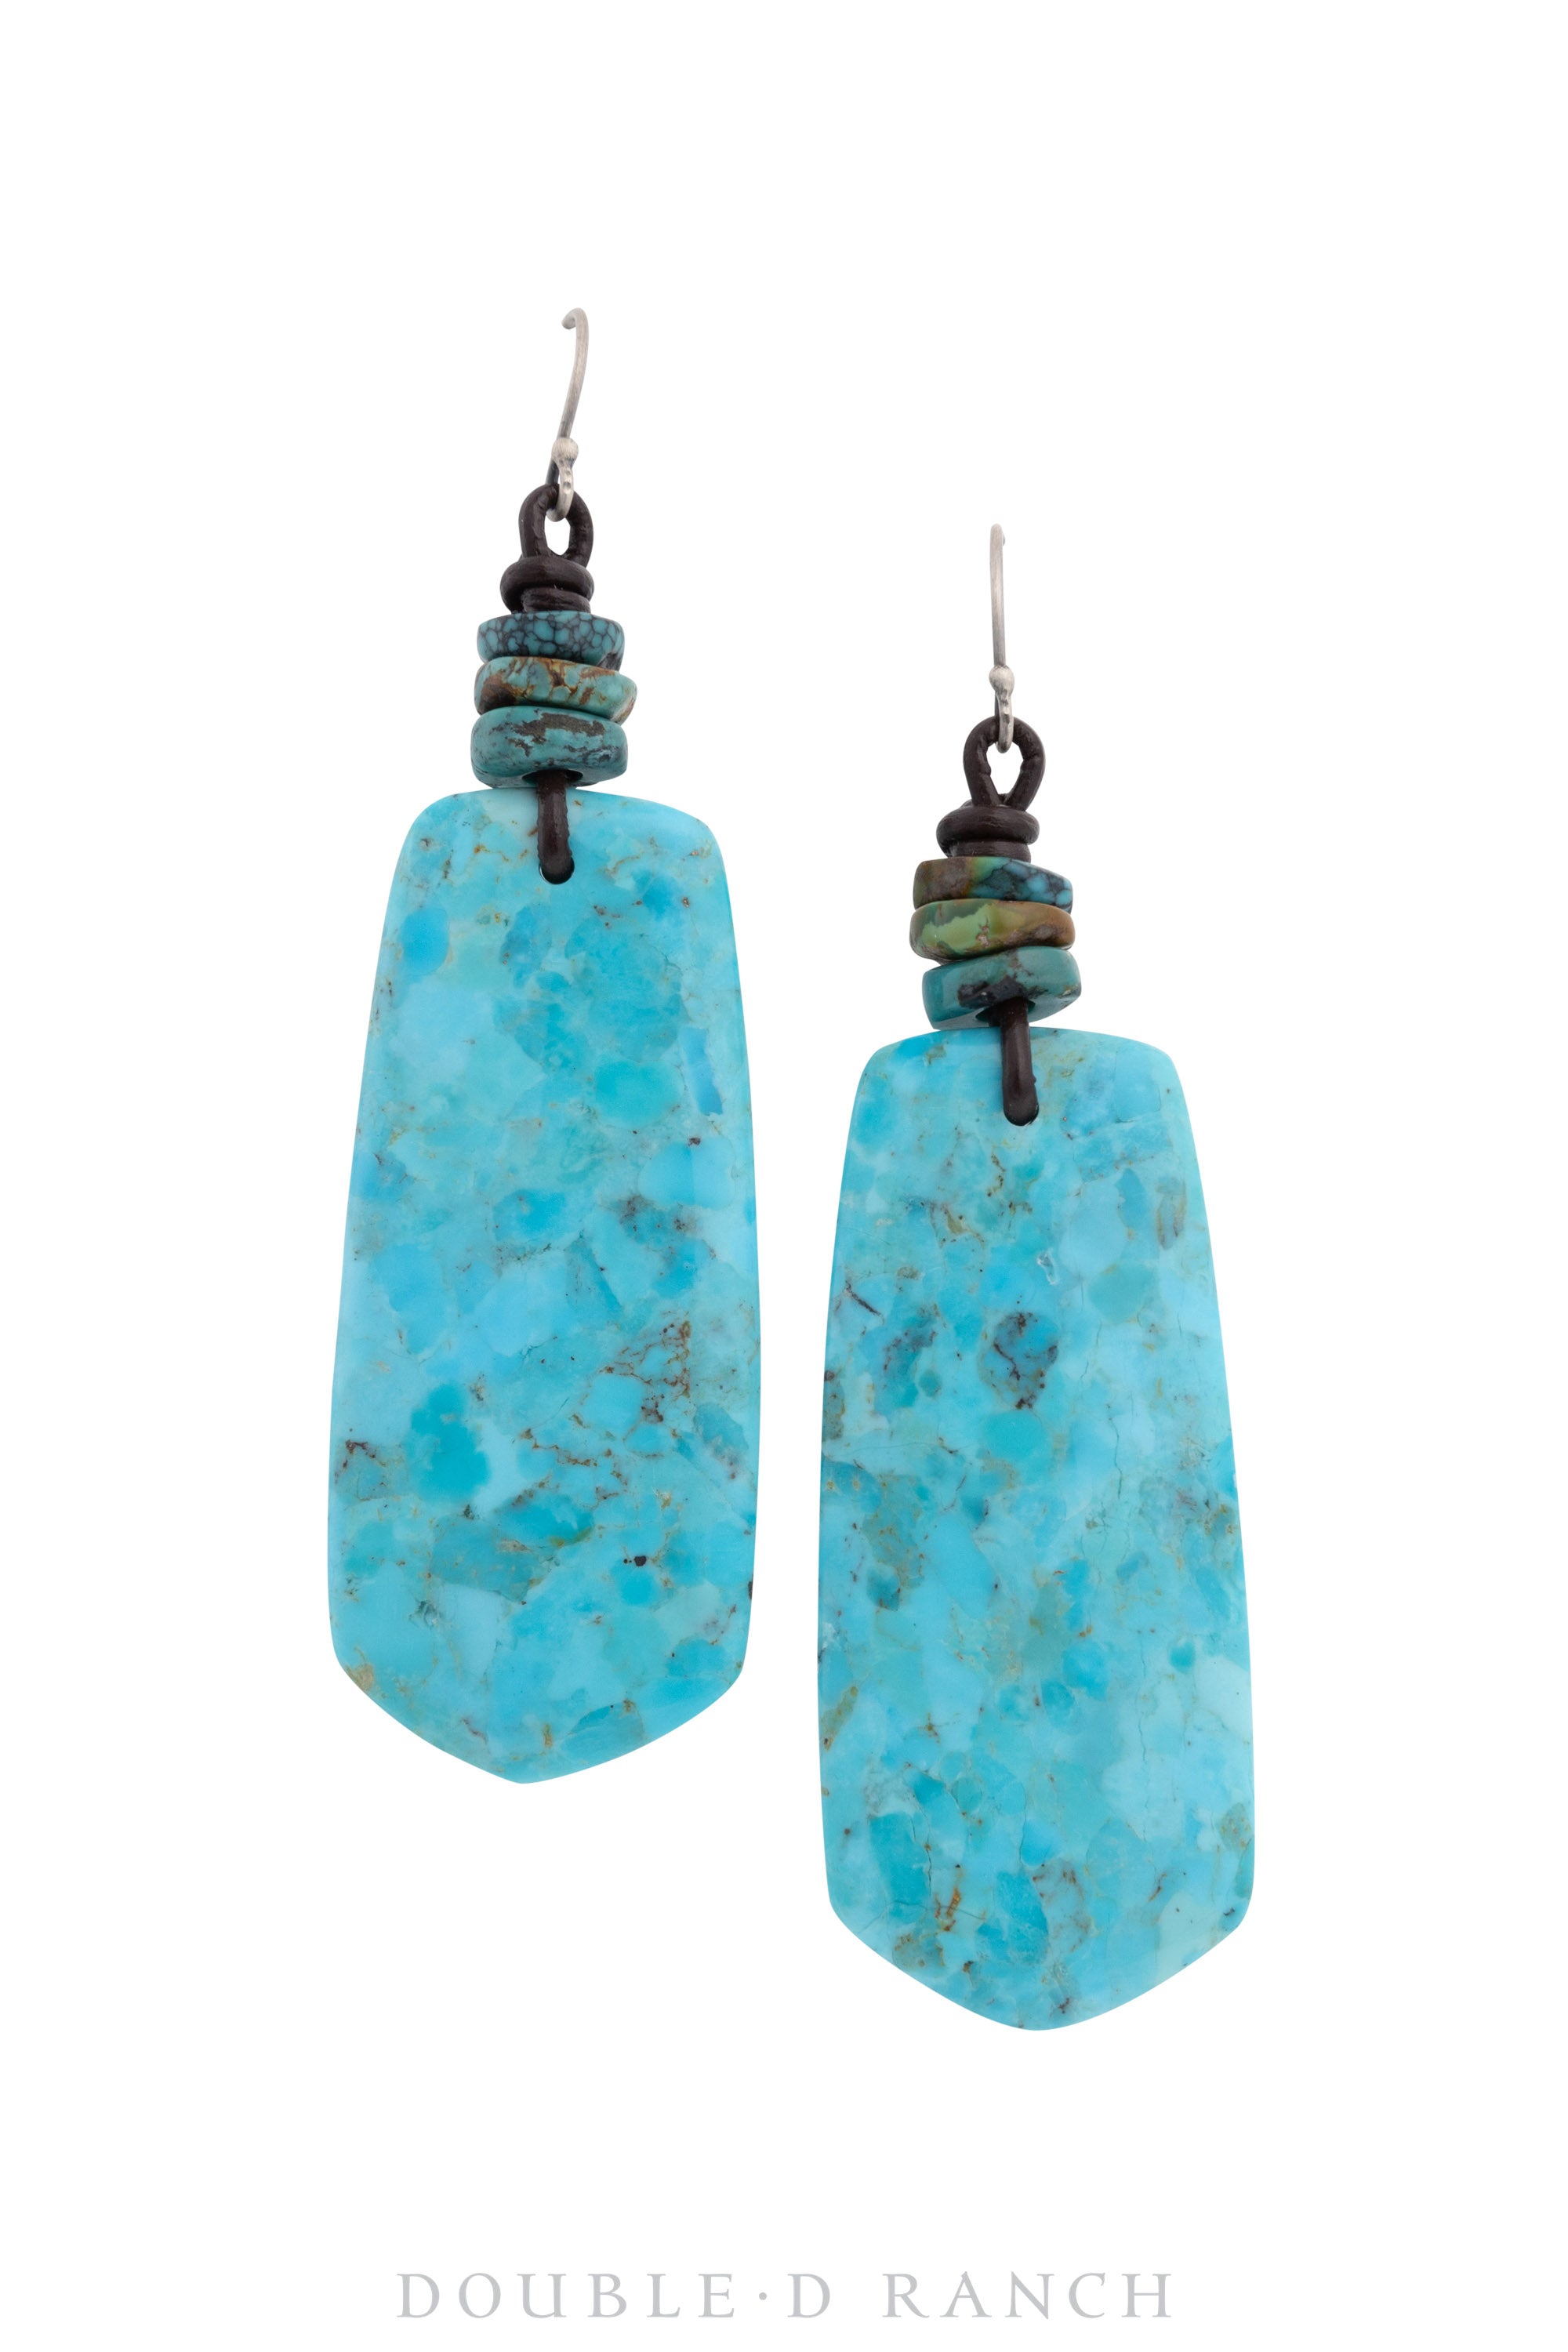 Earrings, Slab, Turquoise Composite, Contemporary, 1478